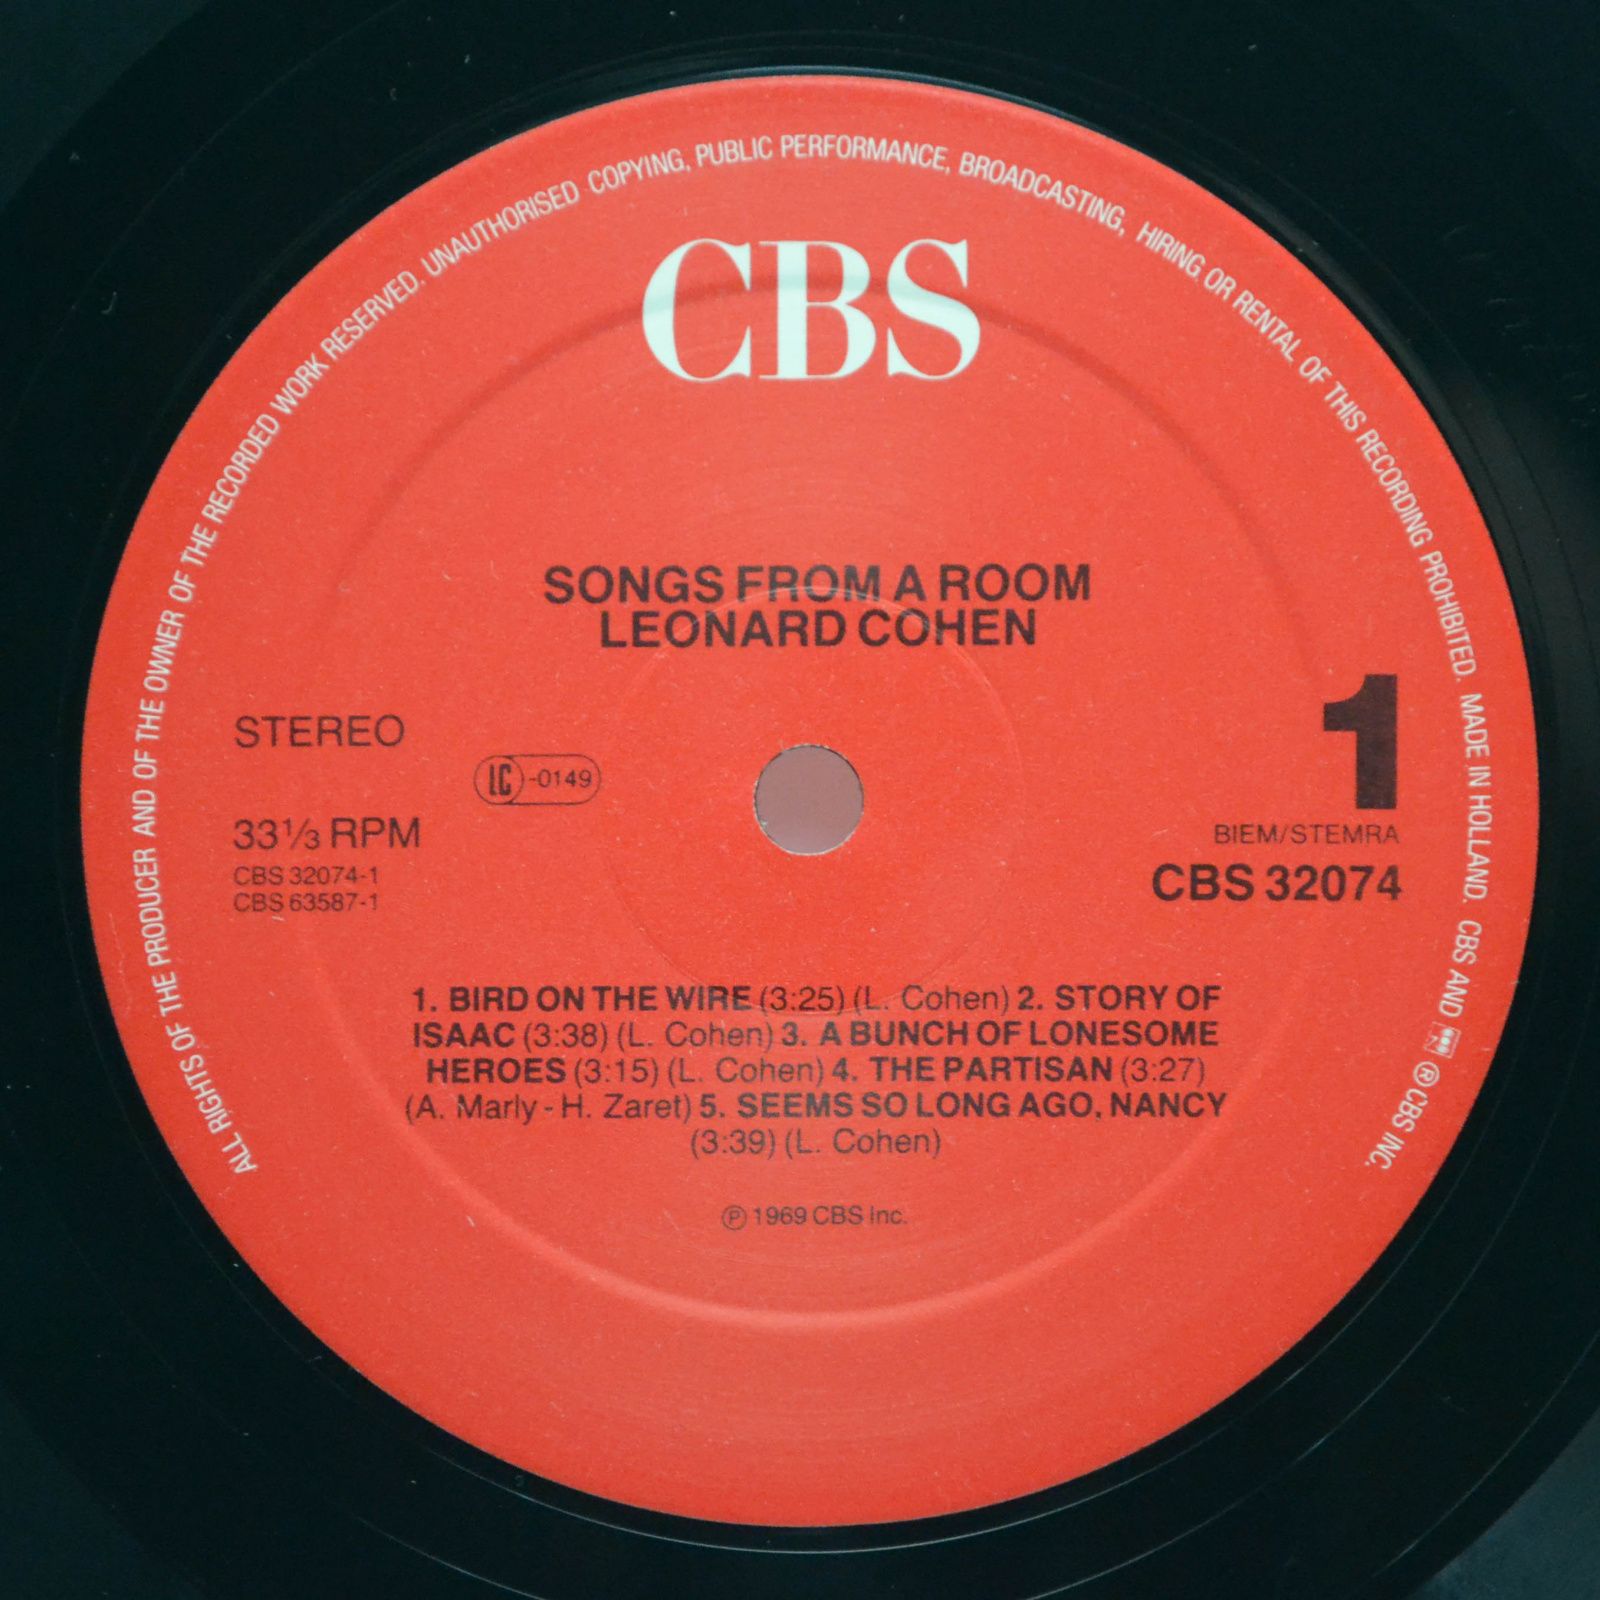 Leonard Cohen — Songs From A Room, 1969